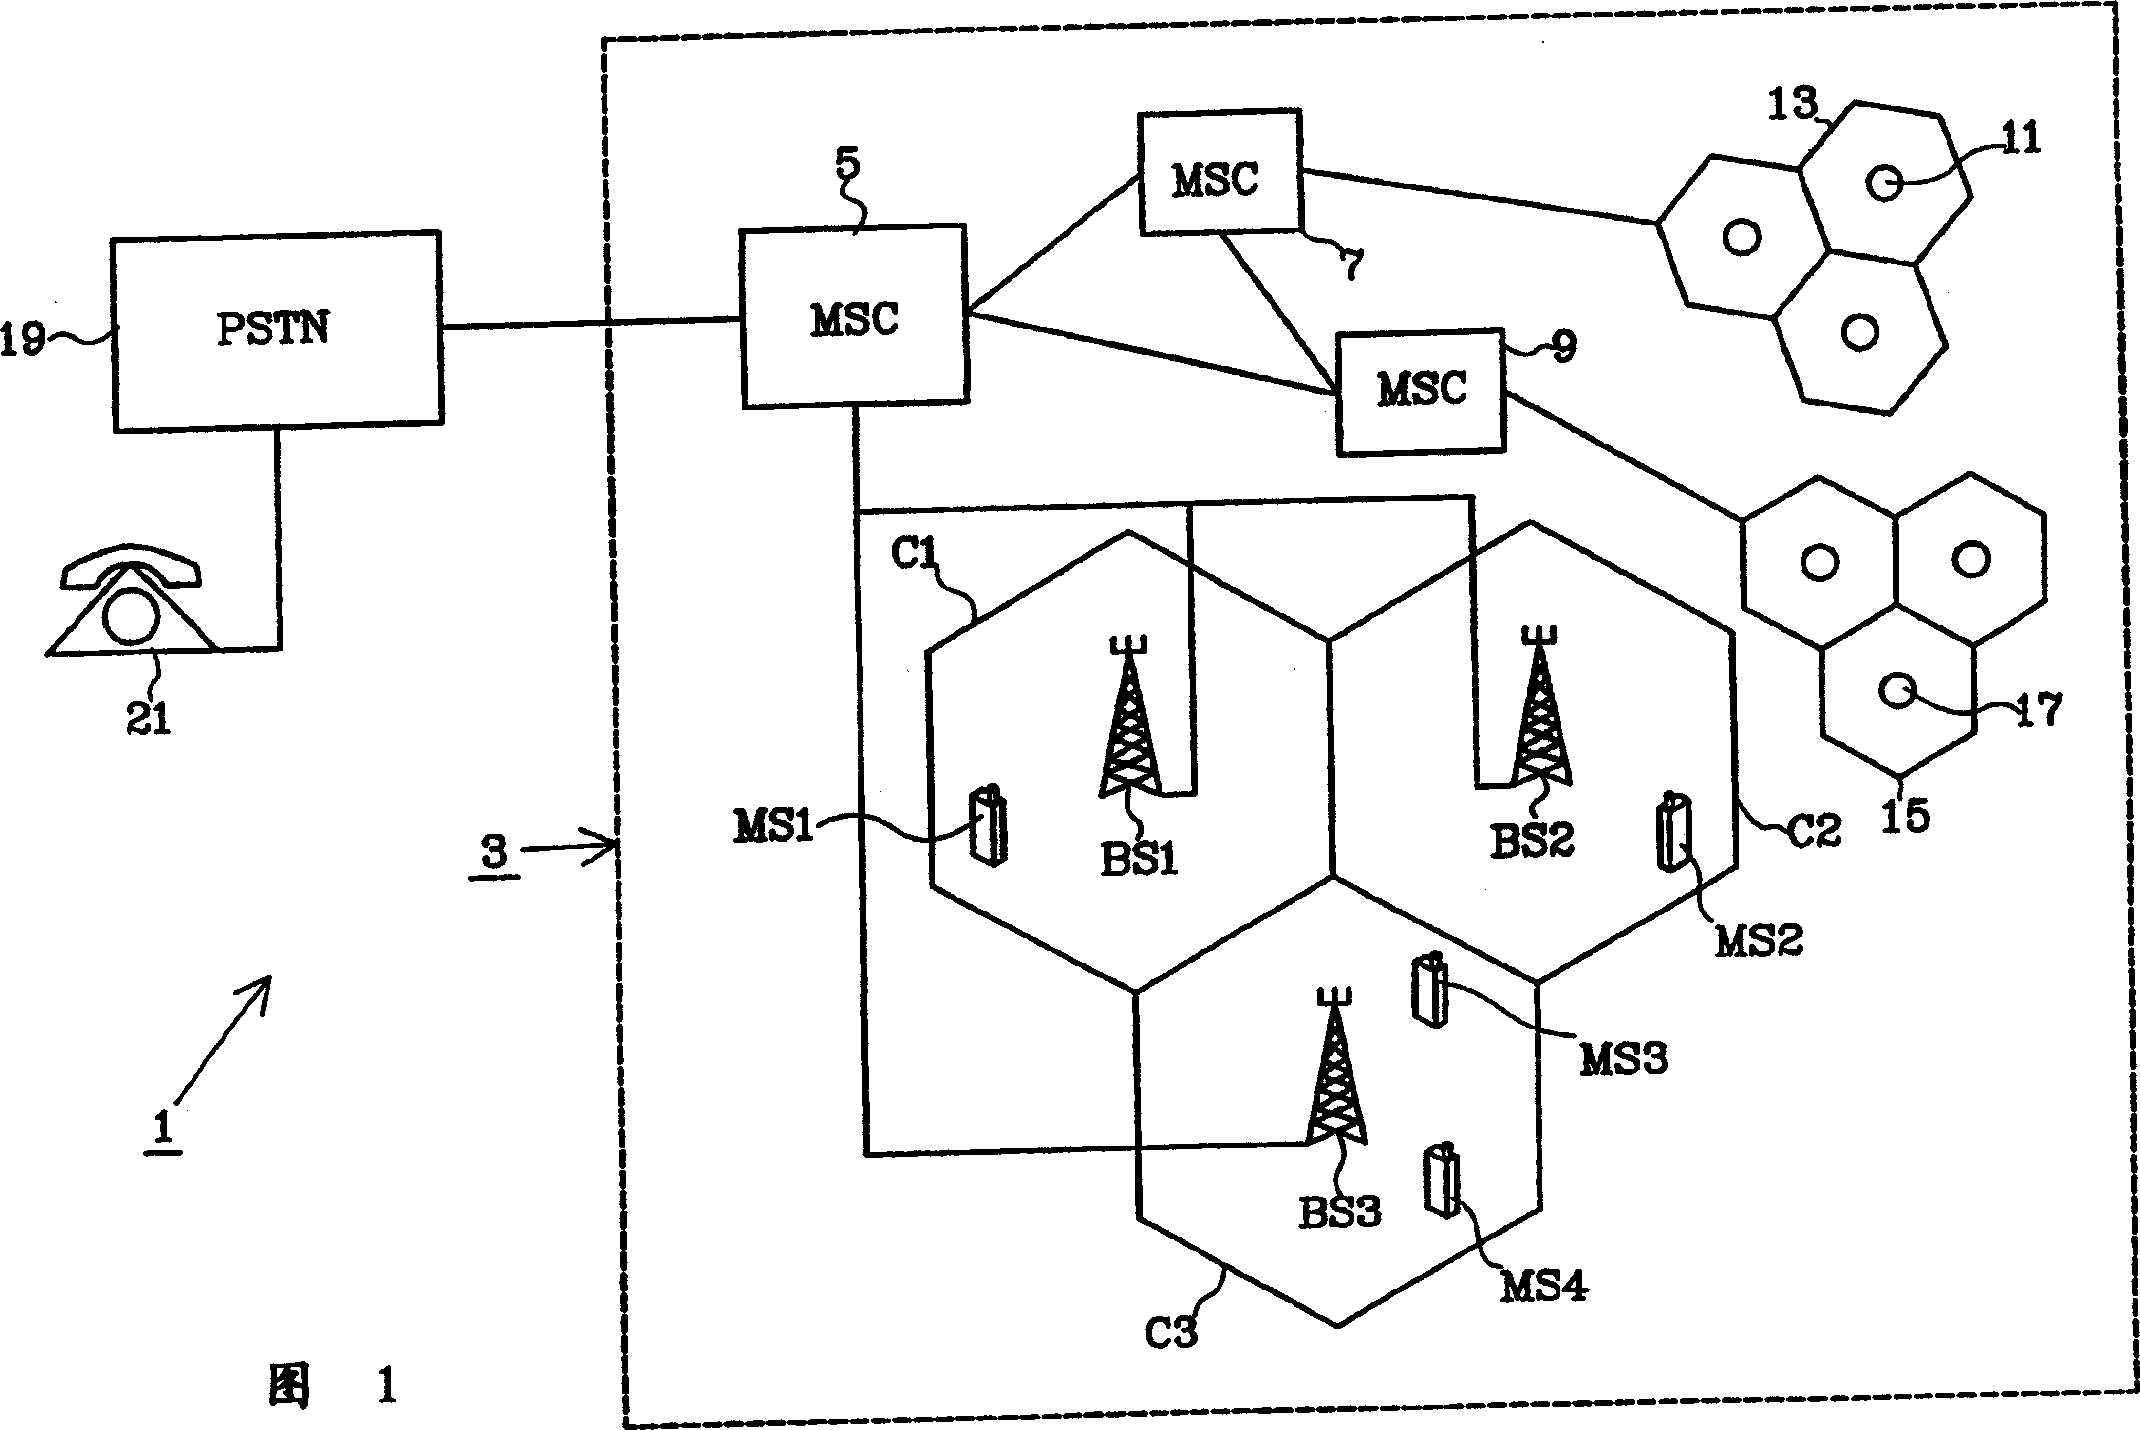 A method and arrangement concerning speech quality in radio communication